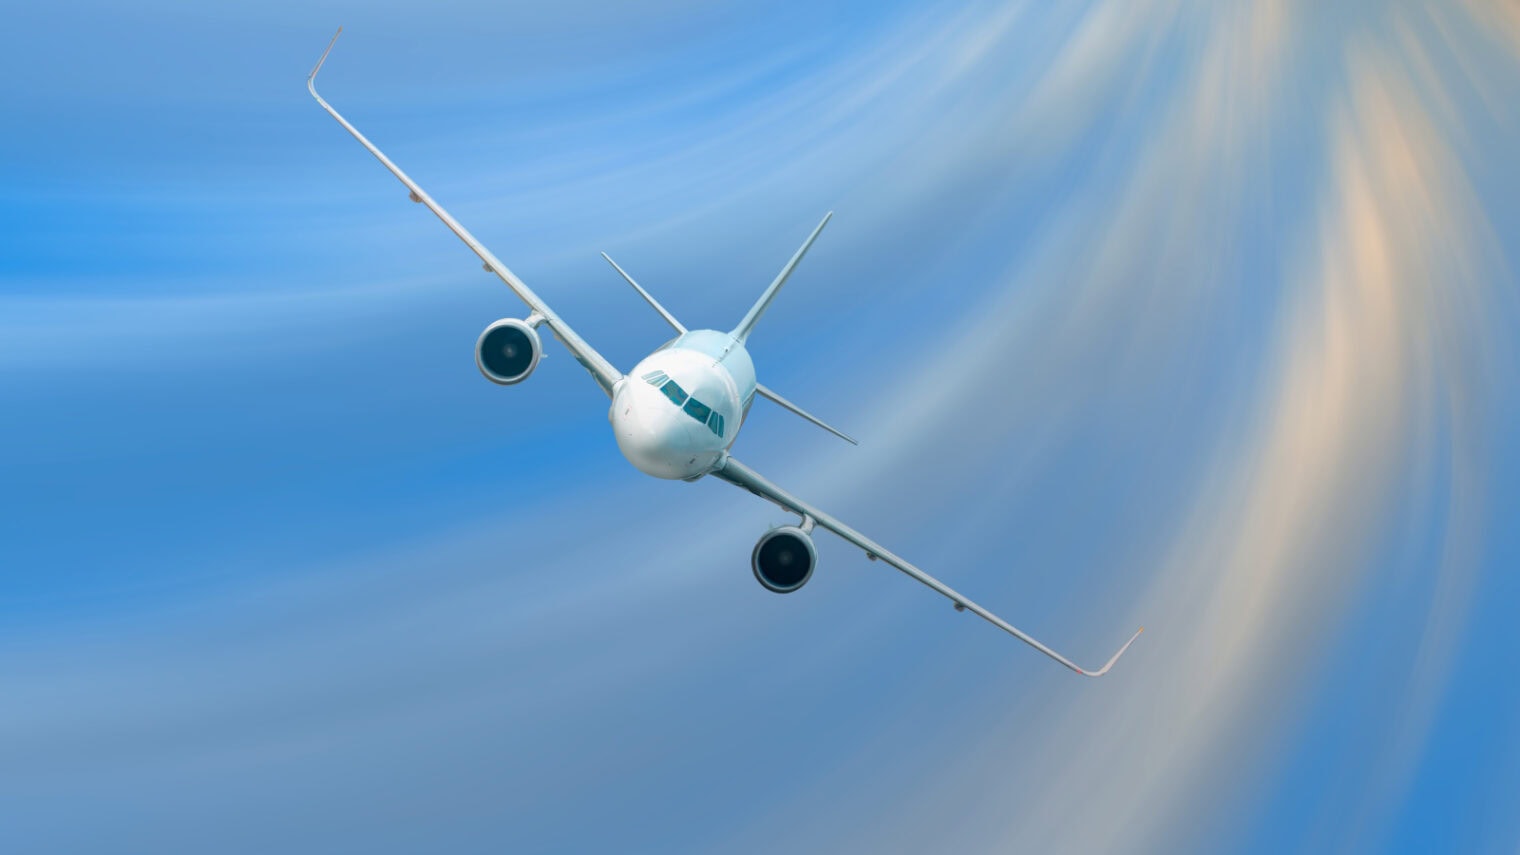 Turbulence is getting worse due to climate change. Image by muratart via Shutterstock.com